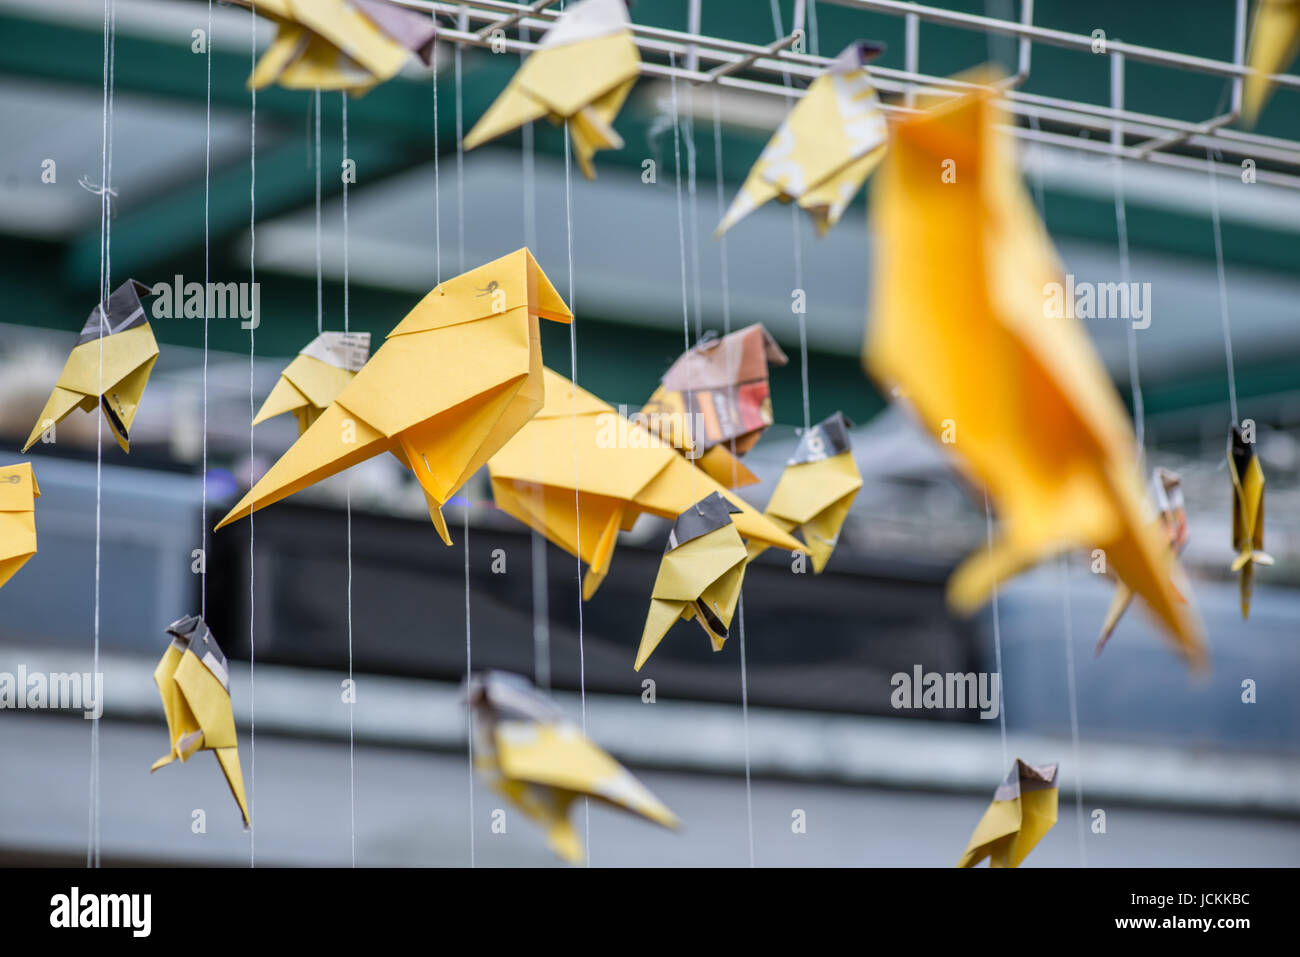 Origami yellow orange paper cranes birds hanging over industrial architectural blurred background Stock Photo